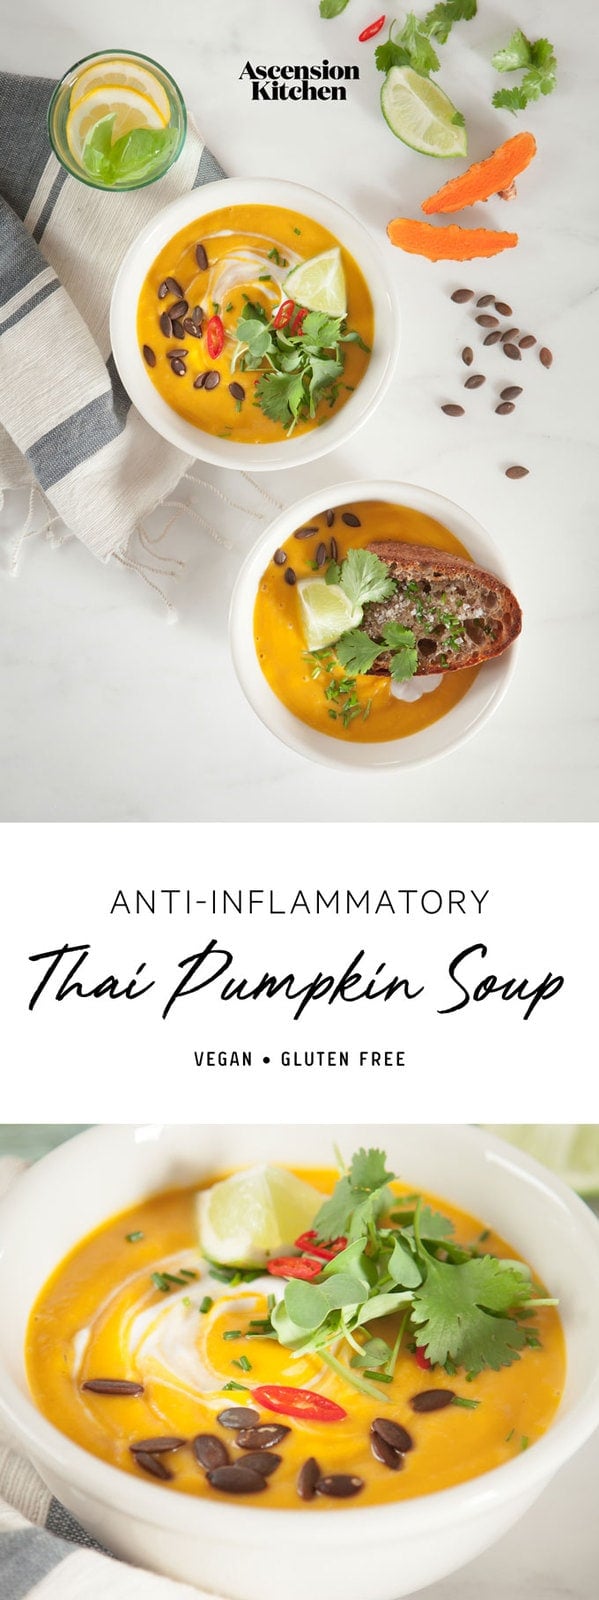 Thai Pumpkin Soup – an anti-inflammatory soup packed with turmeric, ginger, chilli, lemongrass and lime. #thaipumpkinsoup #thaipumpkinsouprecipe #spicythaipumpkinsoup #thaipumpkinsoupcoconutmilk #thaipumpkinsoupvegan #antiinflammatorysoup #antiinflammatorysouprecipes #antiinflammatorysoupturmeric #AscensionKitchen // Pin to your own inspiration board! //